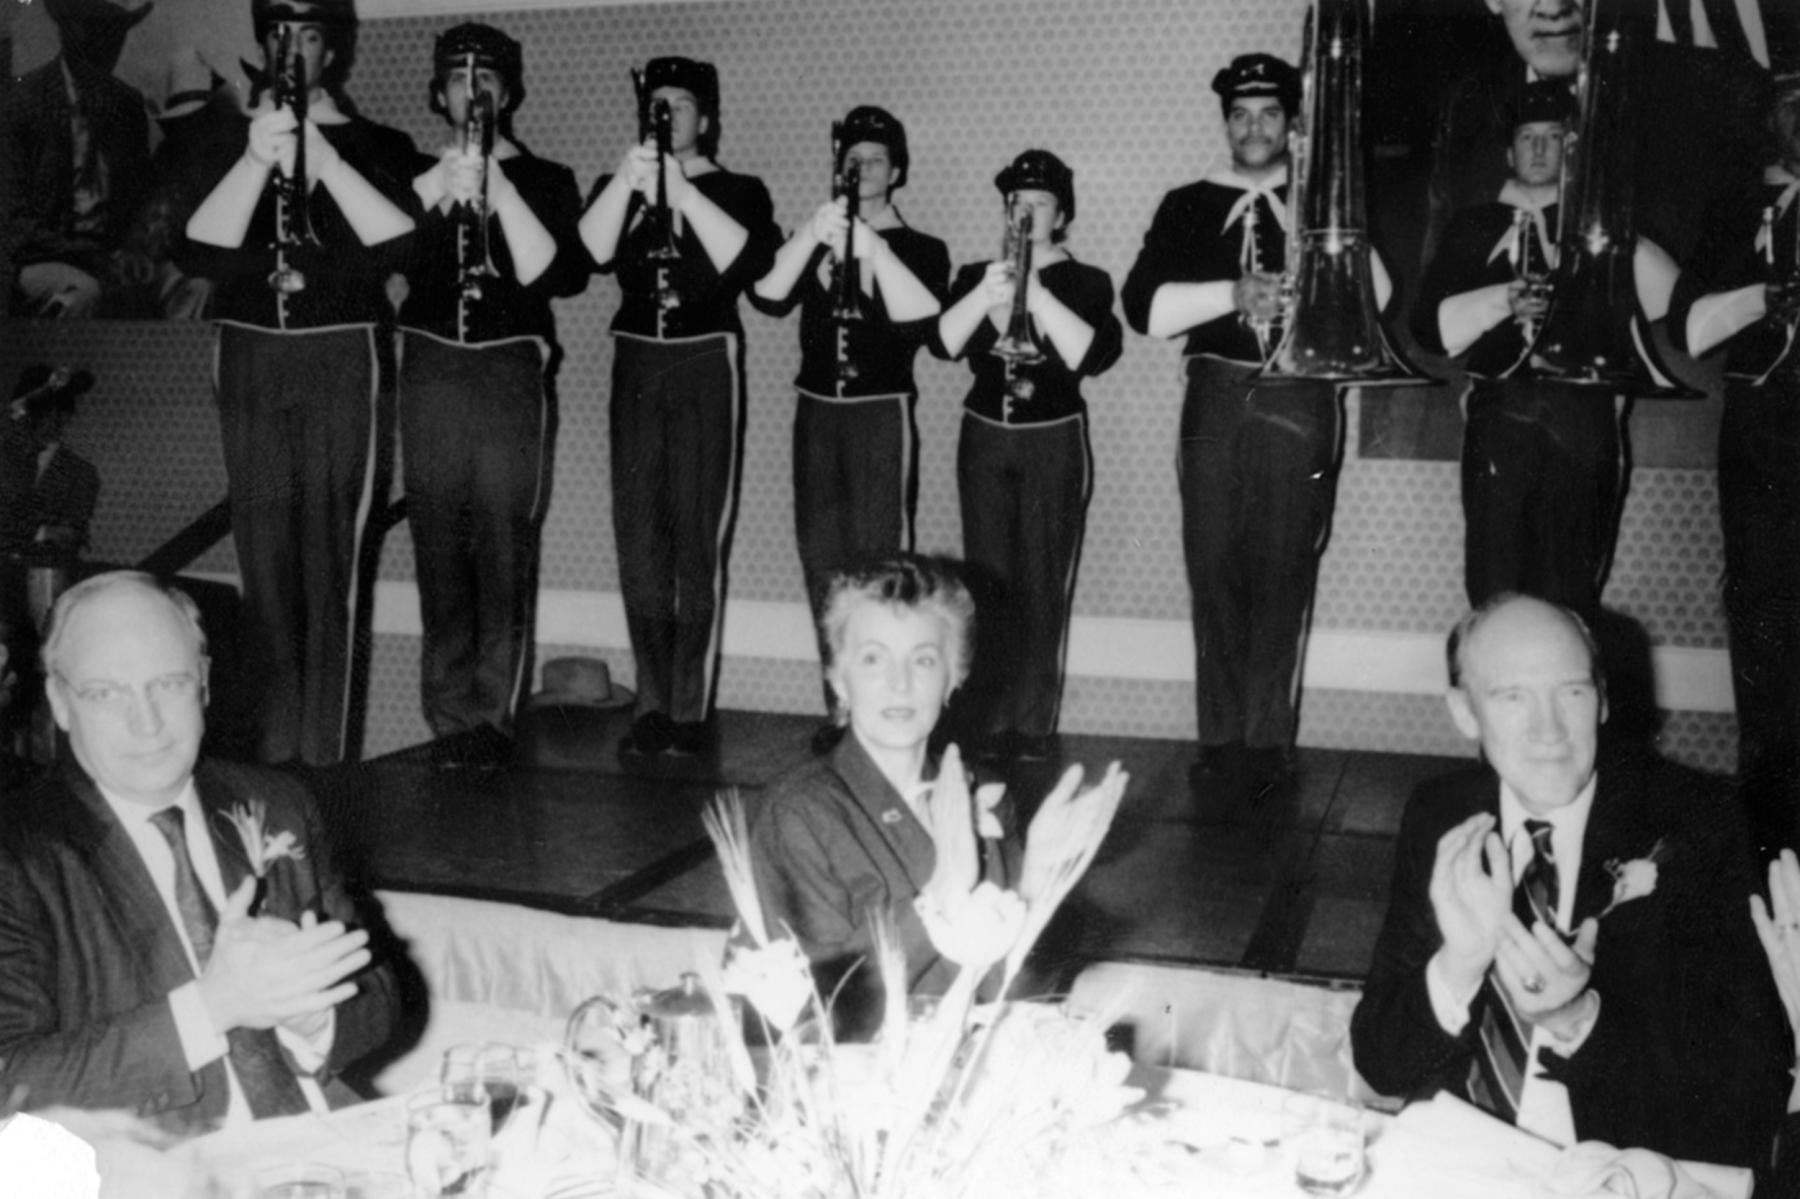 The Troopers performed for a dinner honoring Wyoming’s U.S. Senator Alan Simpson, right, when he received the "Citizen of the West Award" in Denver, Jan. 8, 1990. U.S. Defense Secretary and former Casperite Dick Cheney, left, emceed; Ann Simpson is at center. The Troopers from left to right are Mike Ottoes, Scott Reinsbach, Robert Schlichting, Cedro Toro, Jennifer Williams, Jim Brown, and Jeff Hoyt. Troopers Archives #1880.